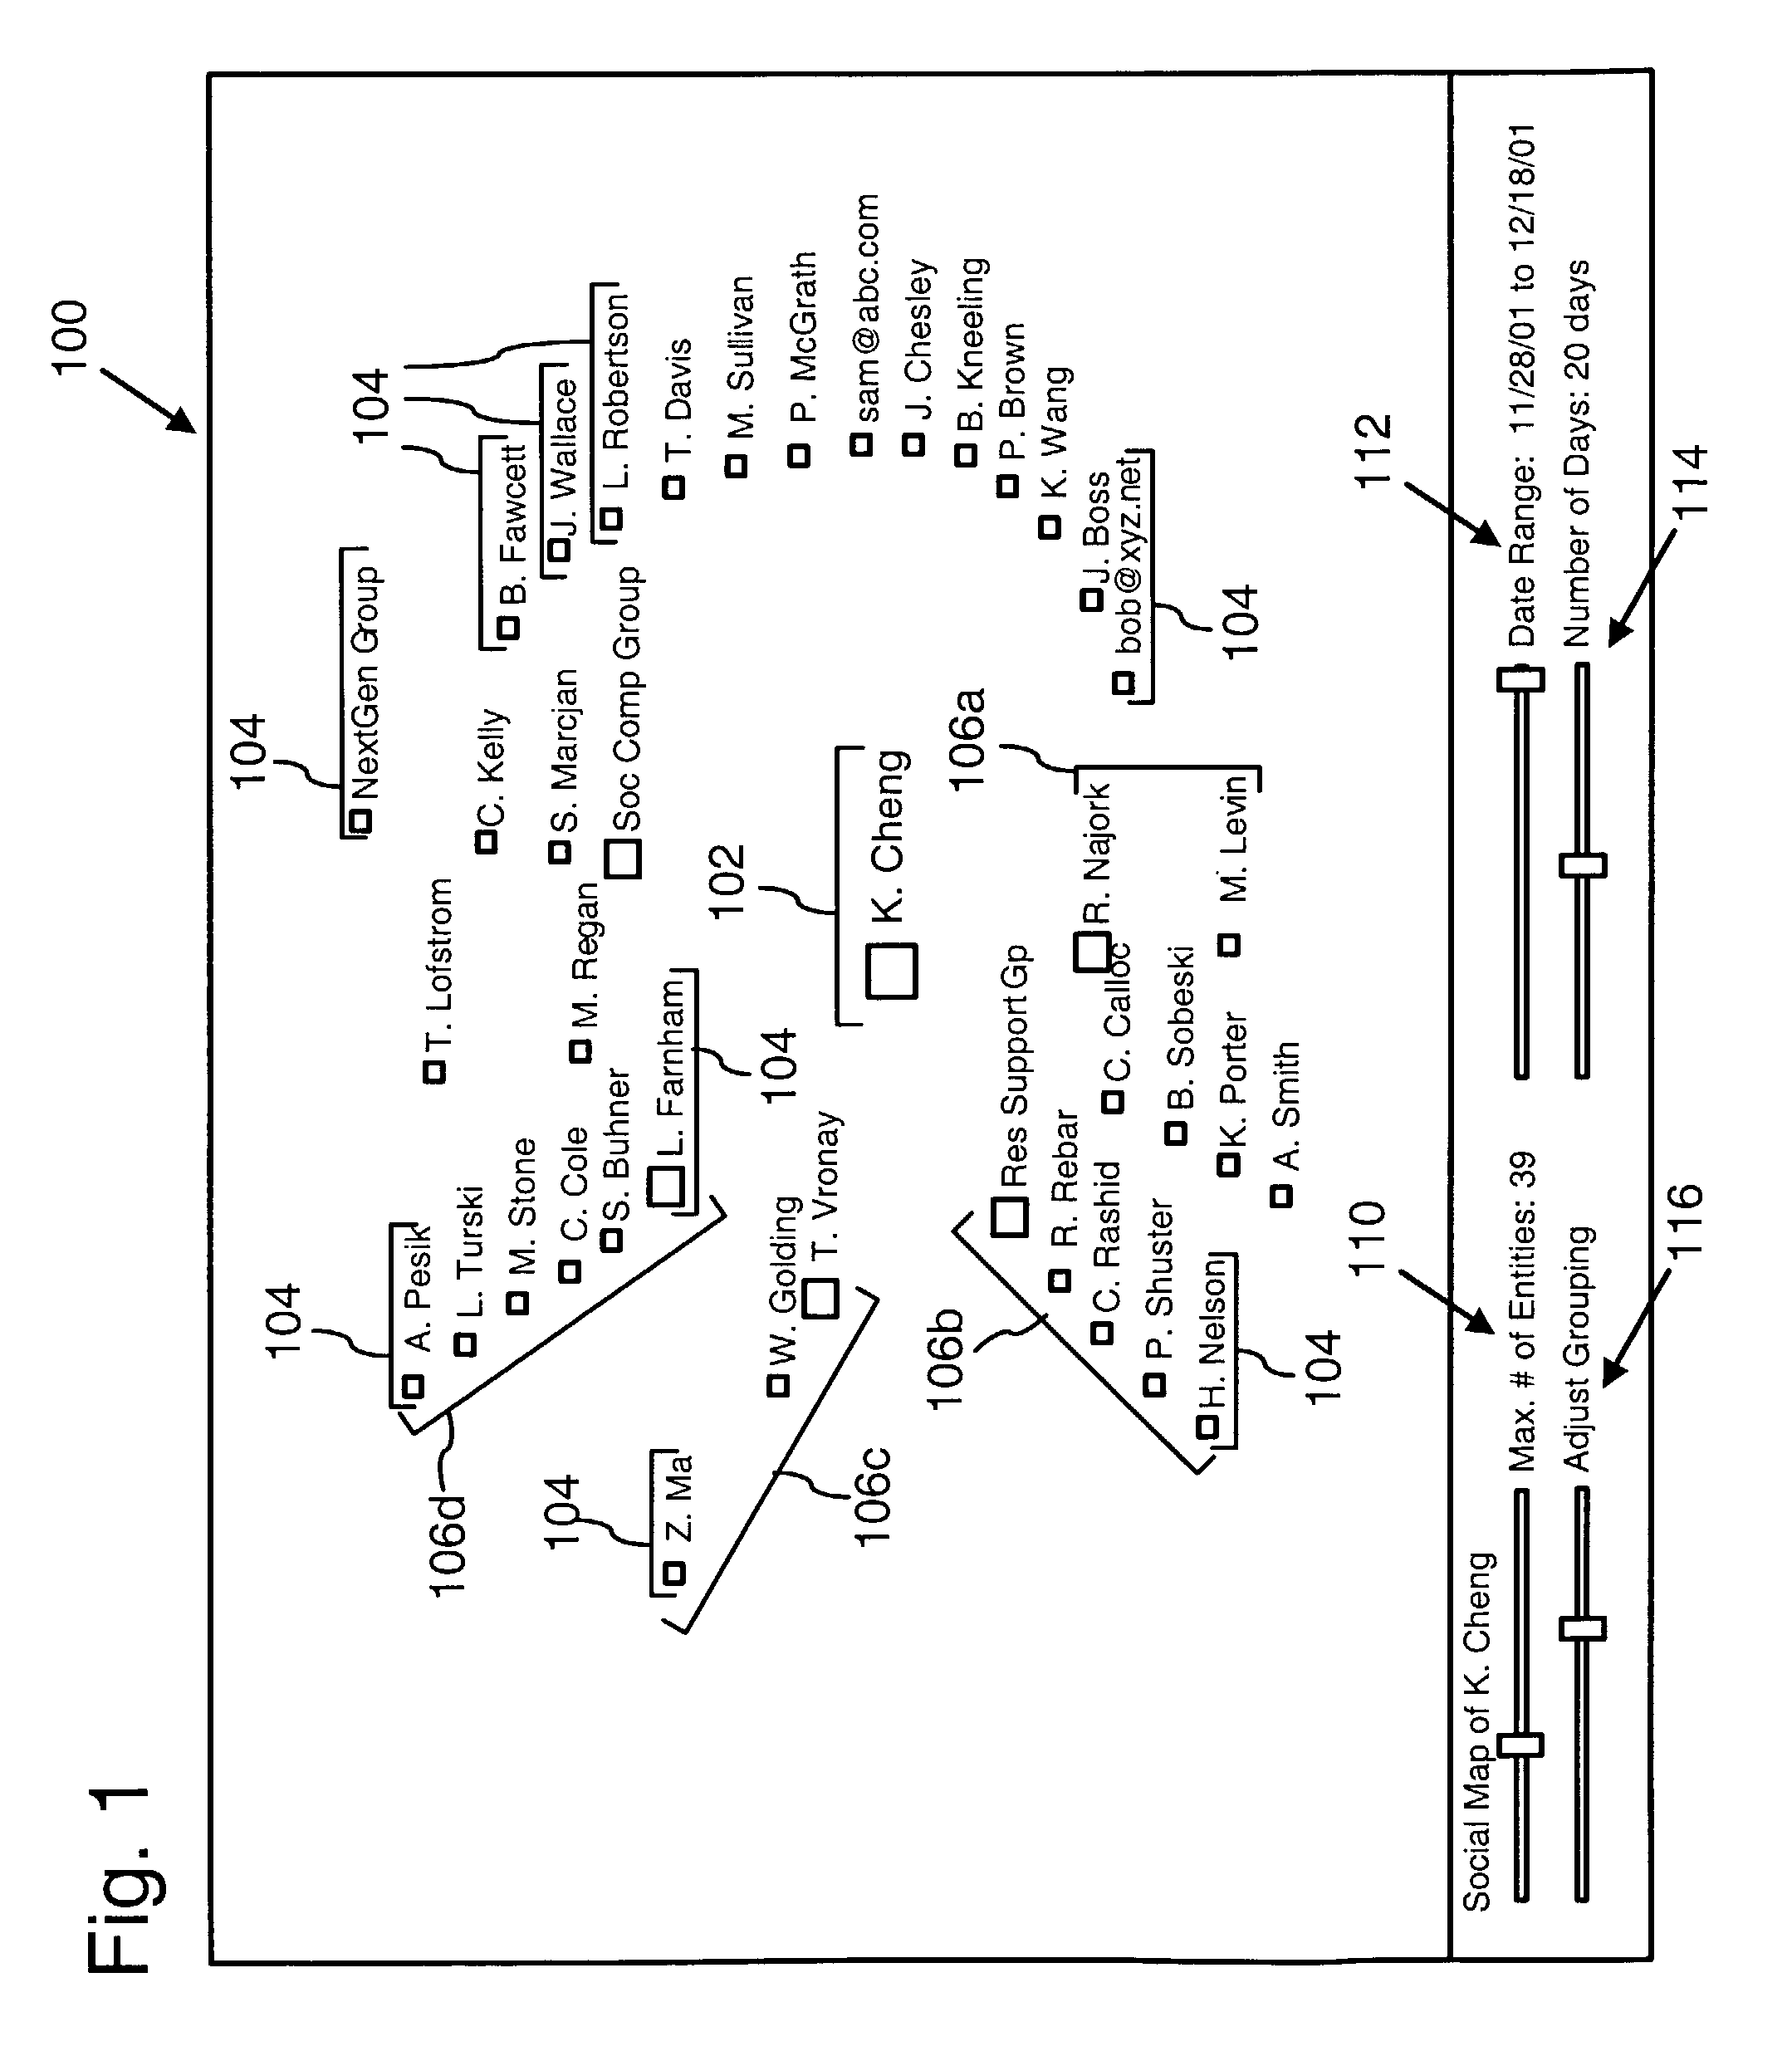 Social mapping of contacts from computer communication information